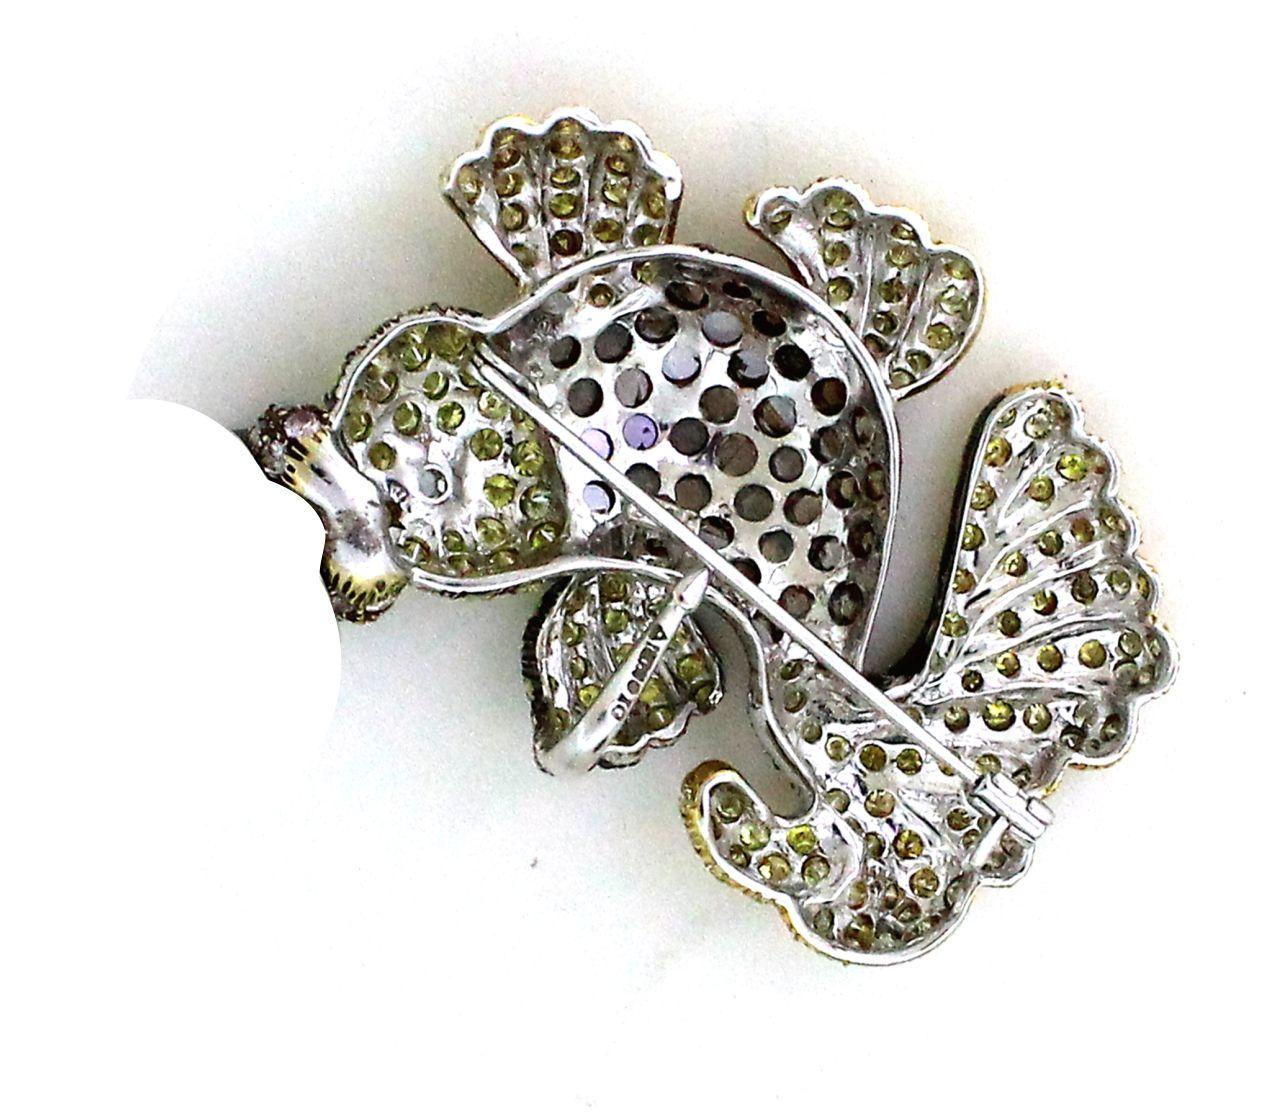 Round Cut 9.35 carats of diamonds brooch inspired by fish For Sale